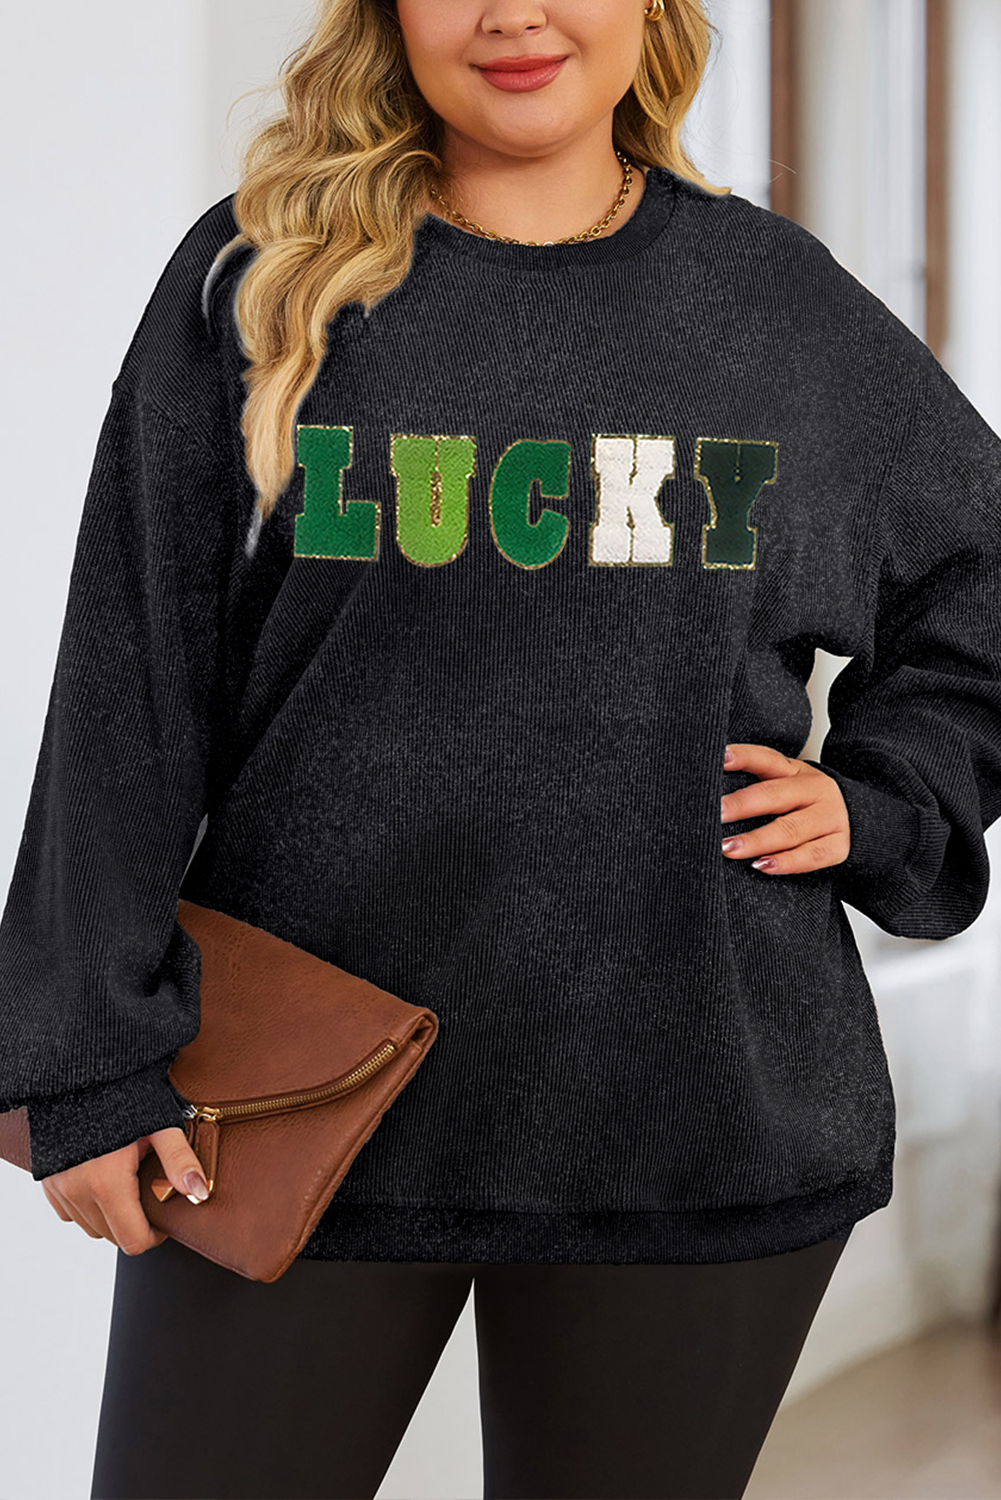 Shewin Wholesale Dropshipping Black Chenille LUCKY Patch Plus Size Corded Graphic SWEATSHIRT